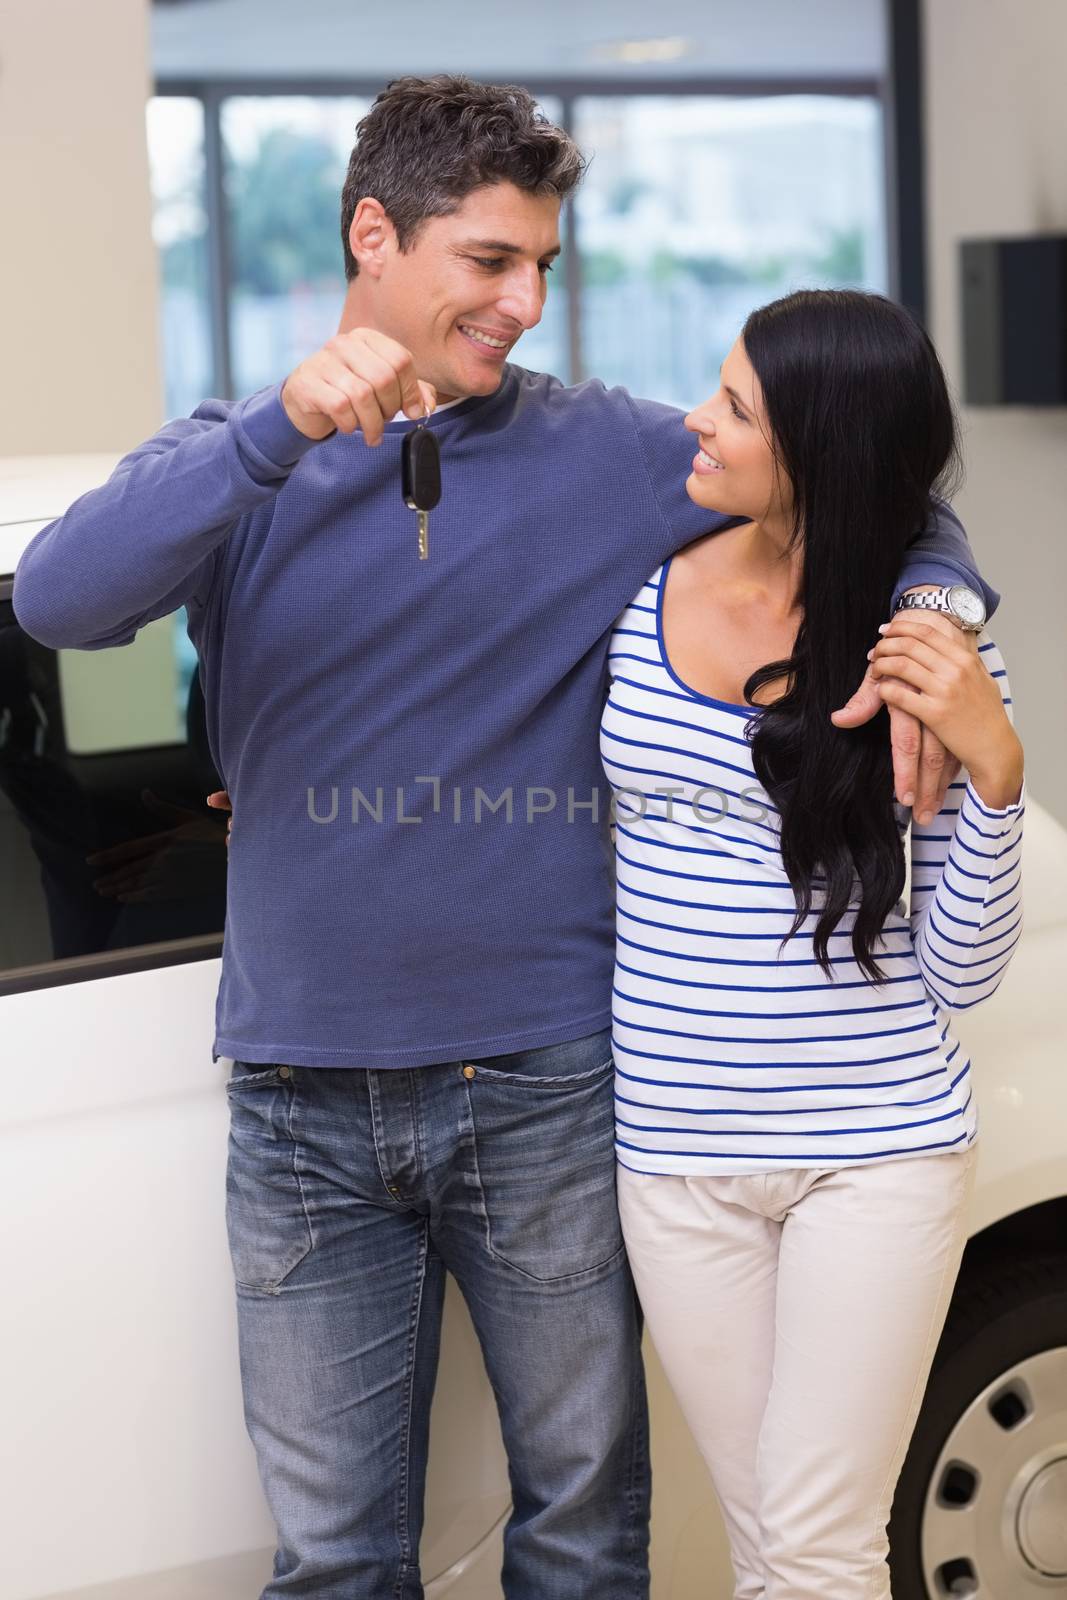 Smiling couple holding their new car key at new car showroom